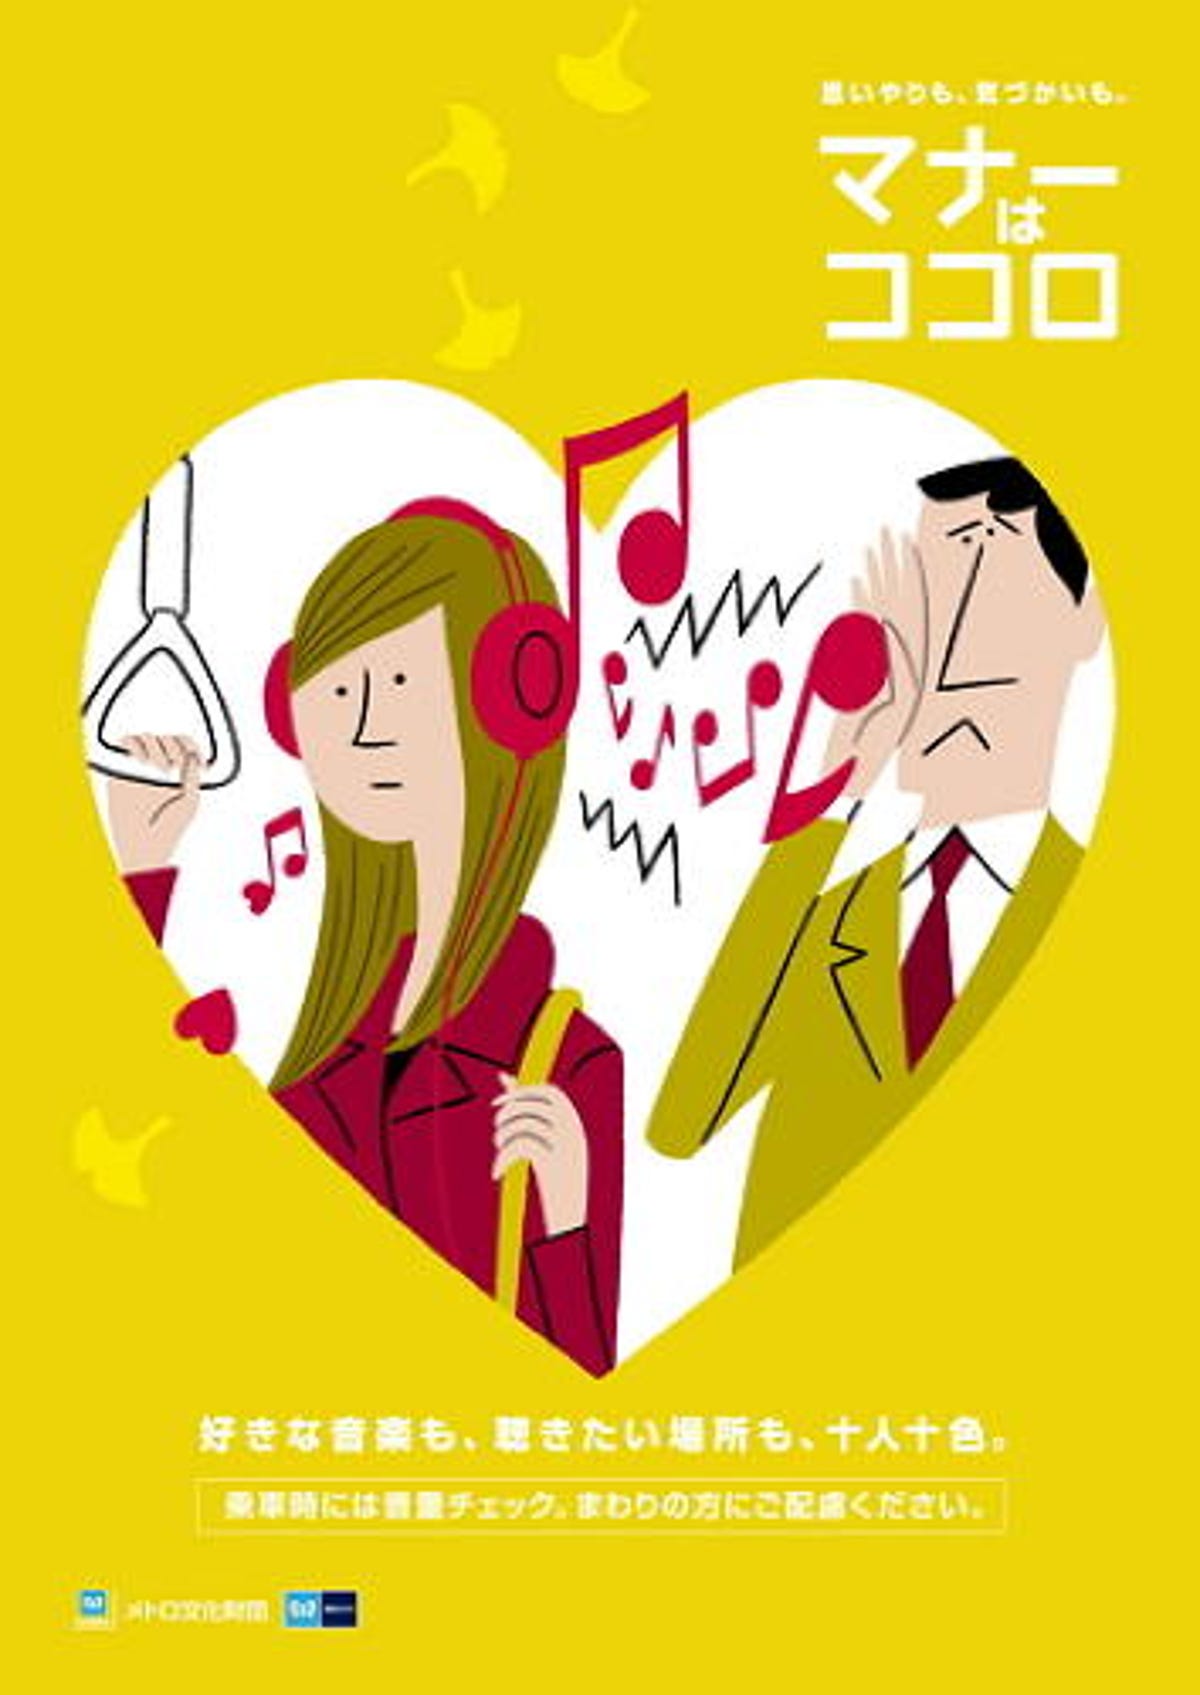 Just because you love Muse, doesn't mean the whole train wants to hear it! One of the many commuter faux pas depicted in a series of posters about manners from Tokyo Metro.